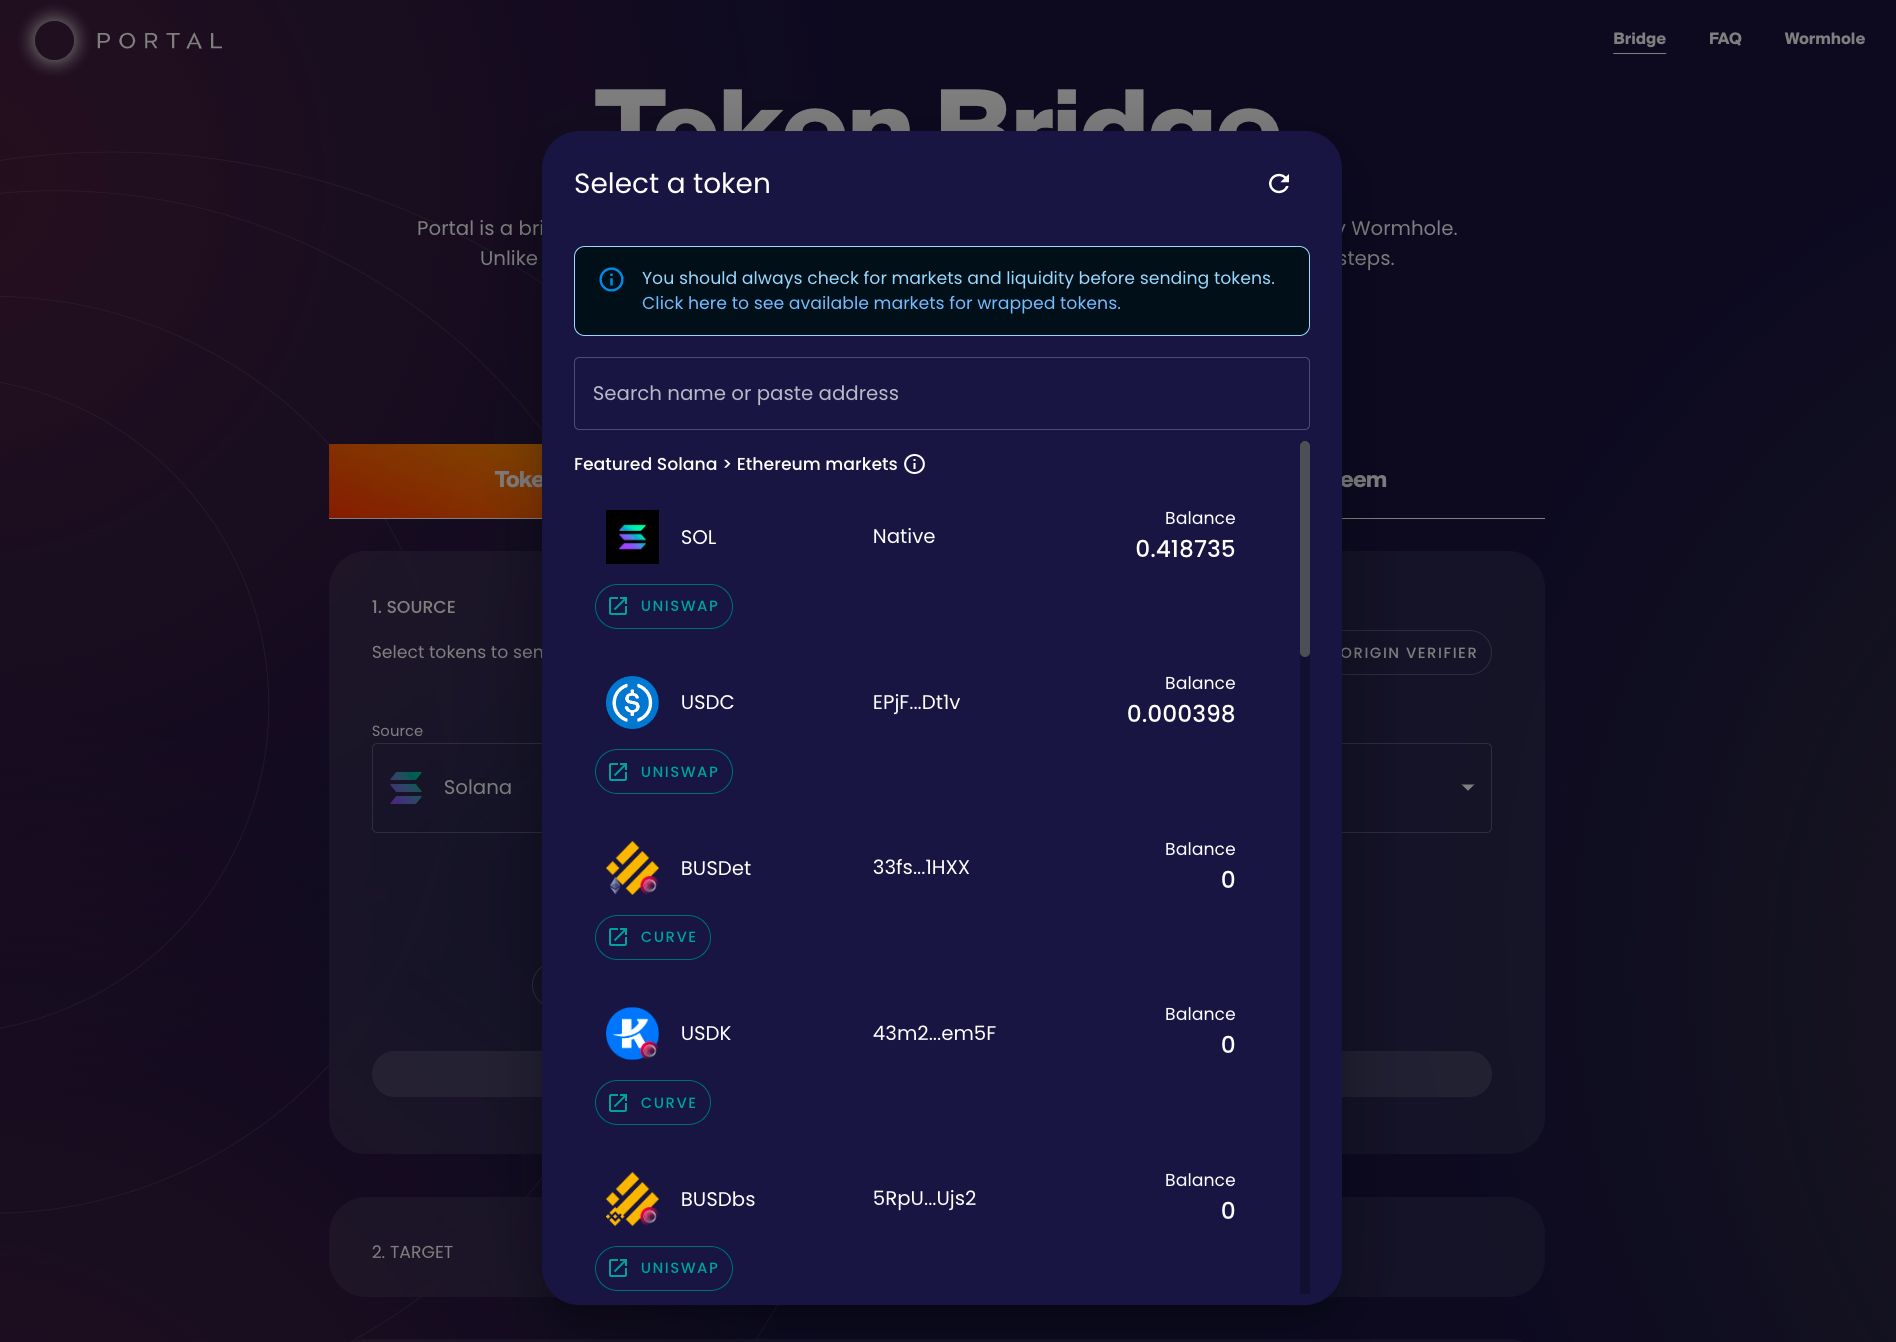 check the featured solana-ethereum liquidity markets